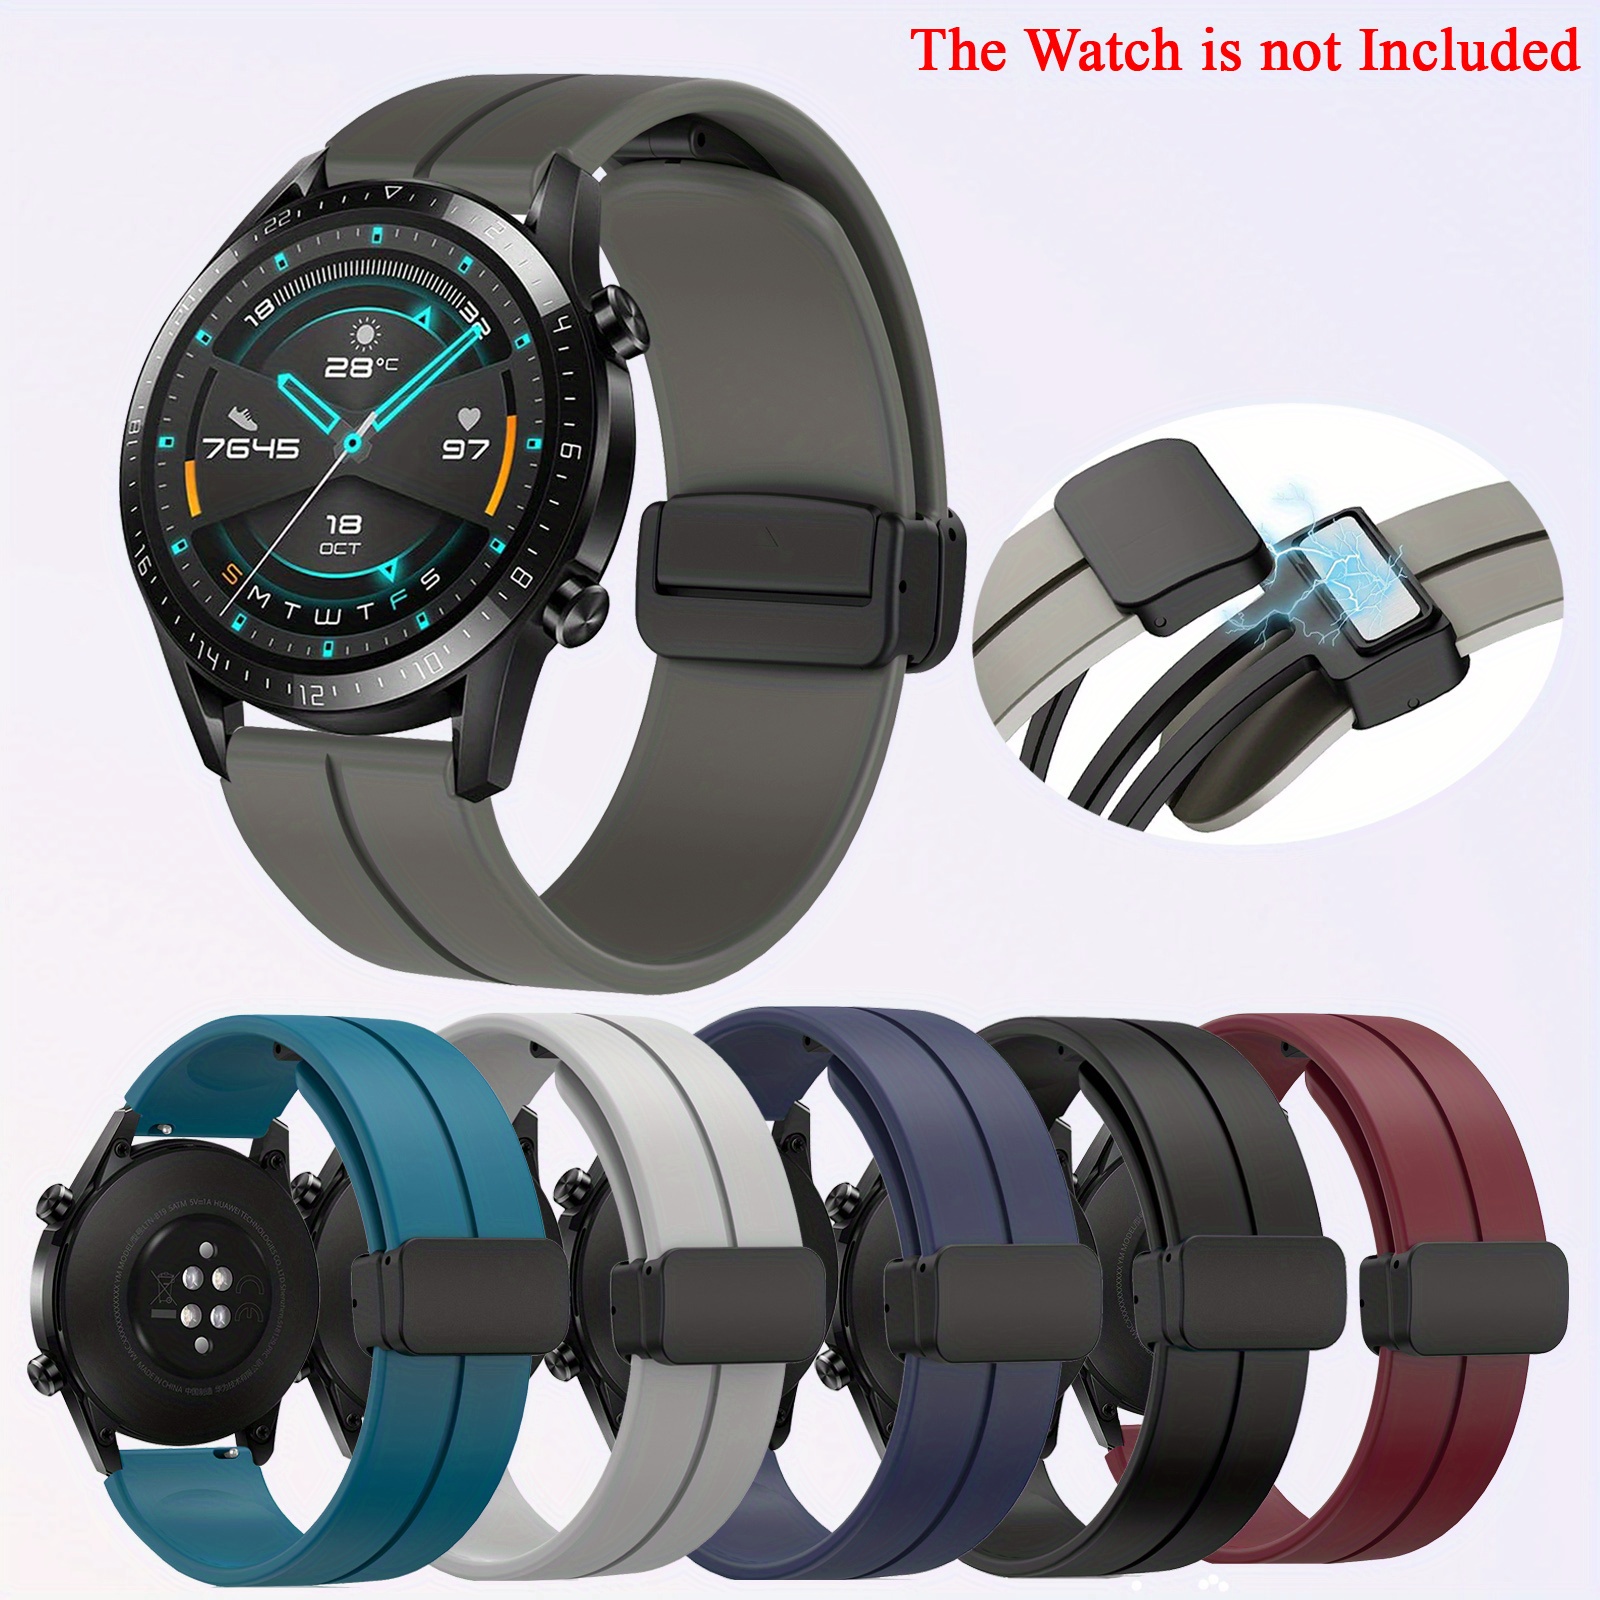 MOTONG for Huawei Watch GT2 pro Replacement Band - 22MM Silicone  Replacement Wrist Band Strap For Huawei Watch GT2 pro(Silicone Black)